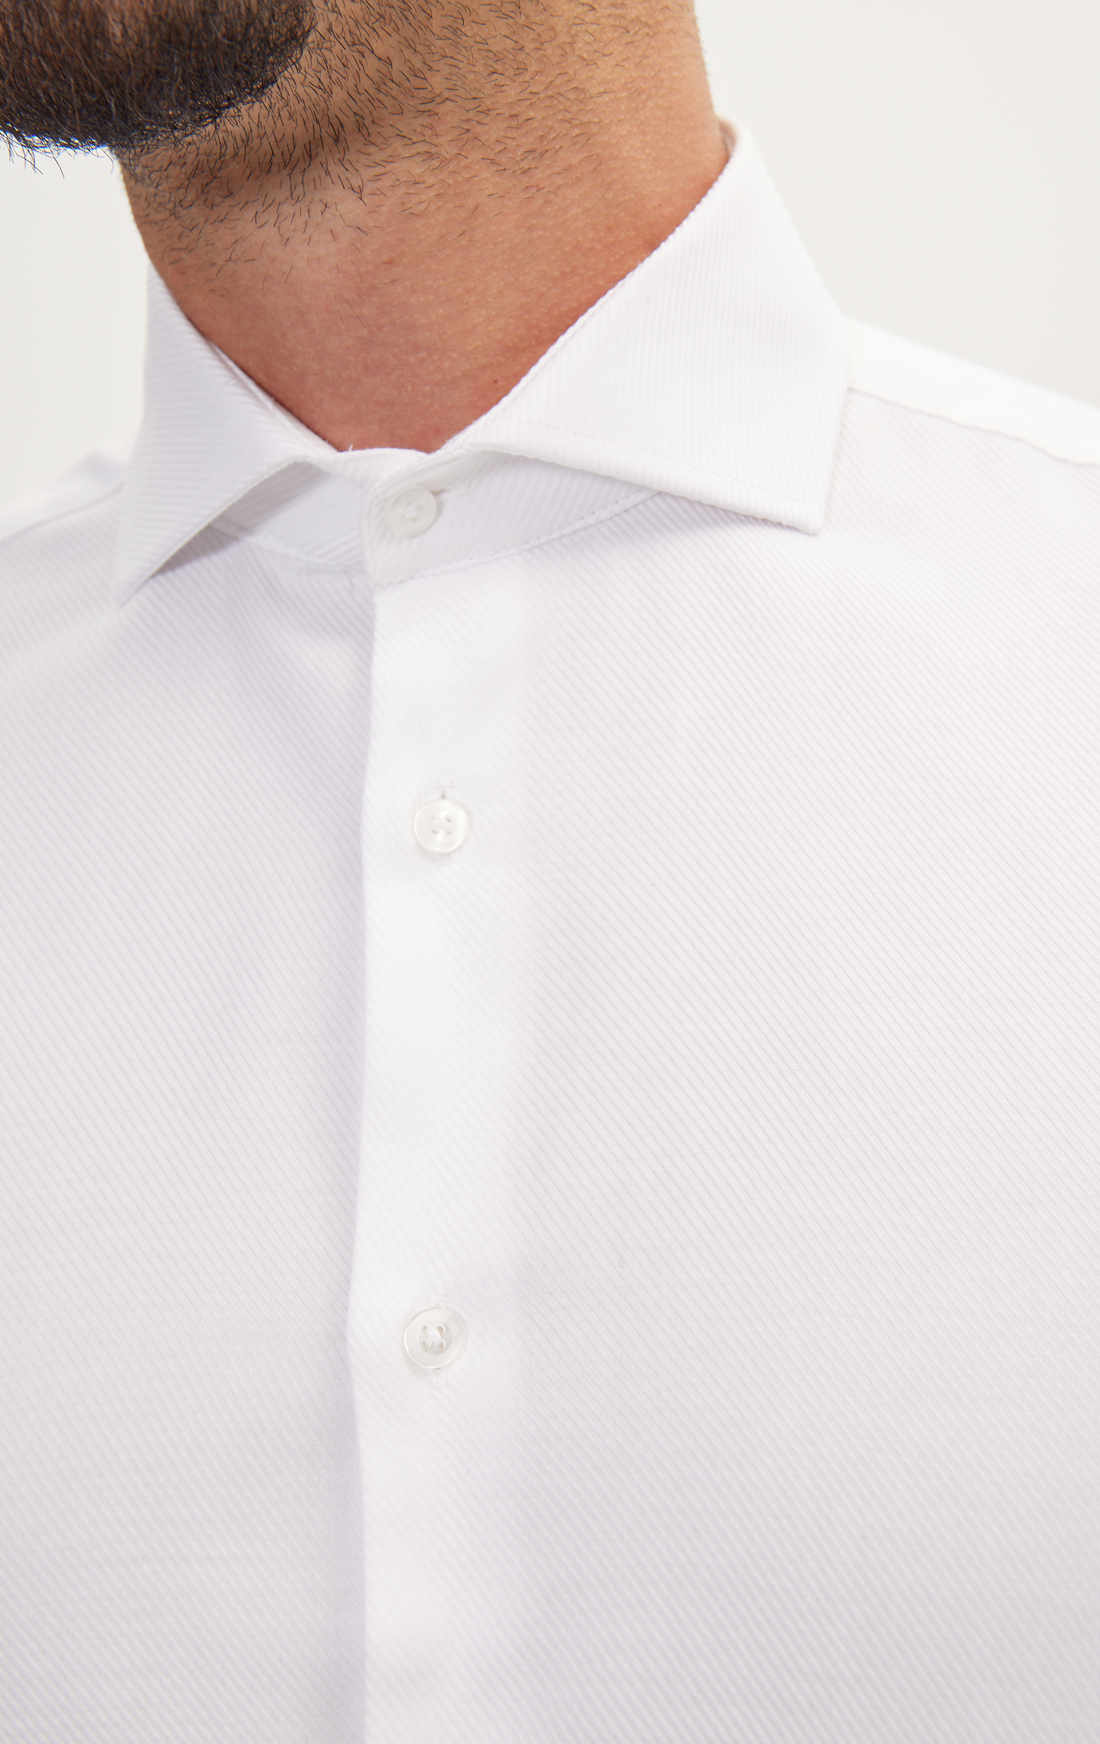 N° AN4902 PURE COTTON FRENCH PLACKET SPREAD COLLAR DRESS SHIRT - WHITE GREY TWILL